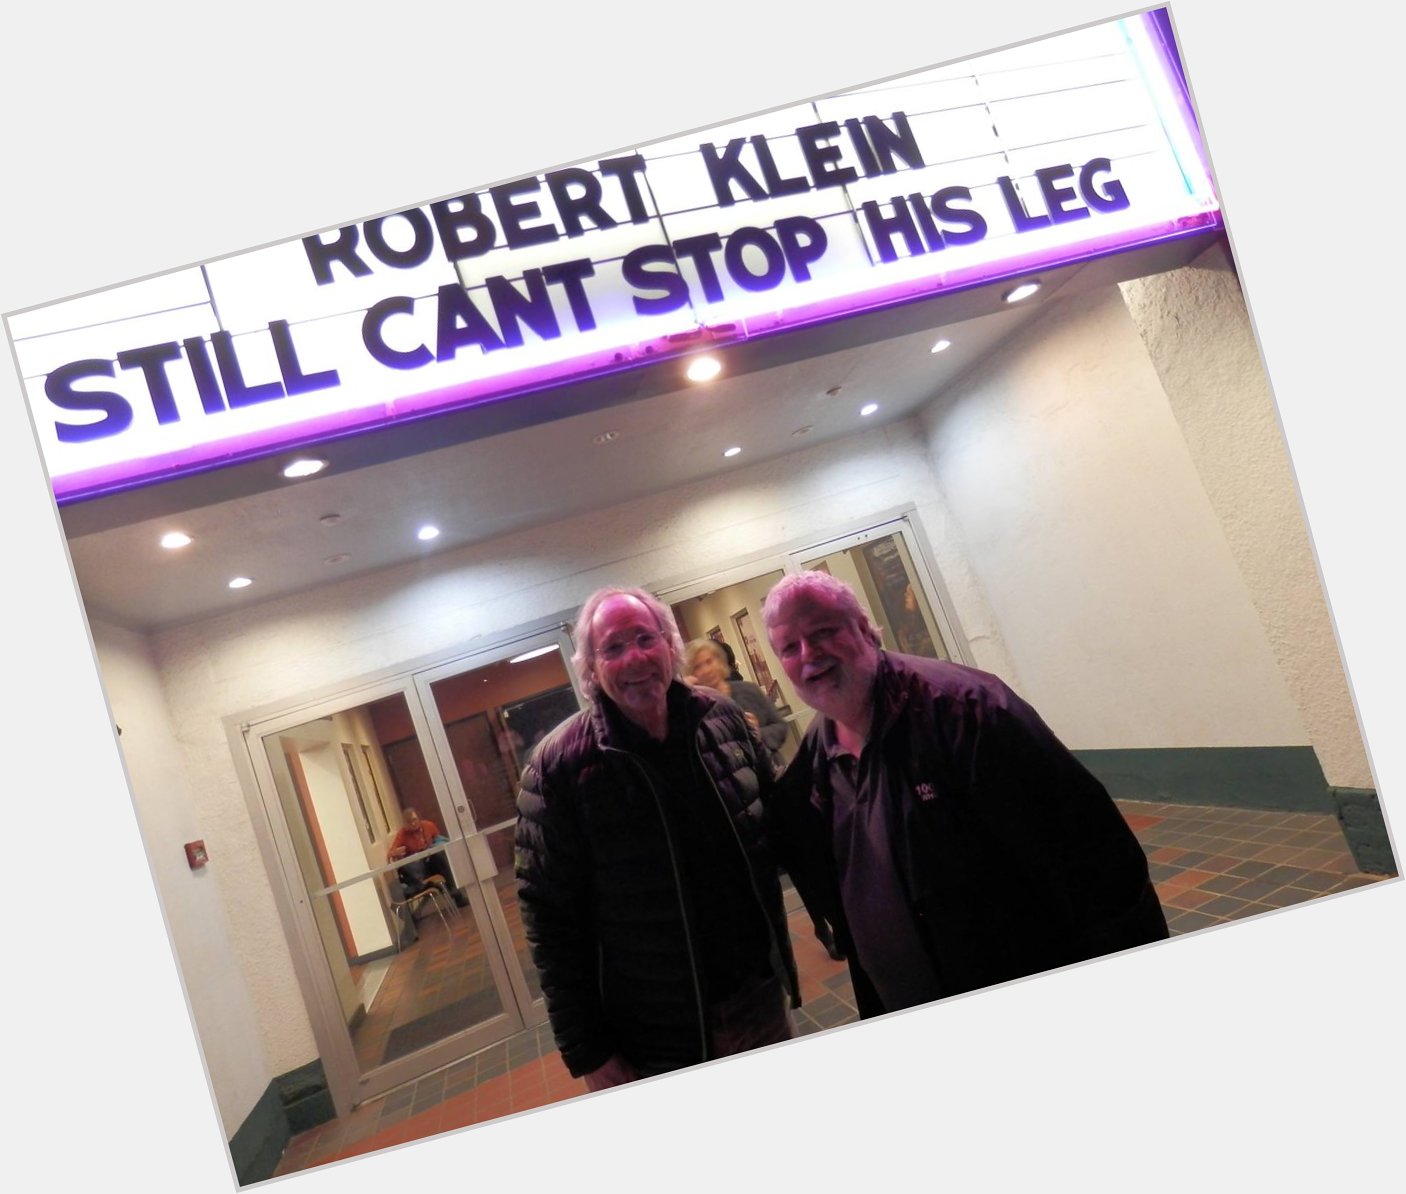 Happy 79th birthday to the very funny Robert Klein! 